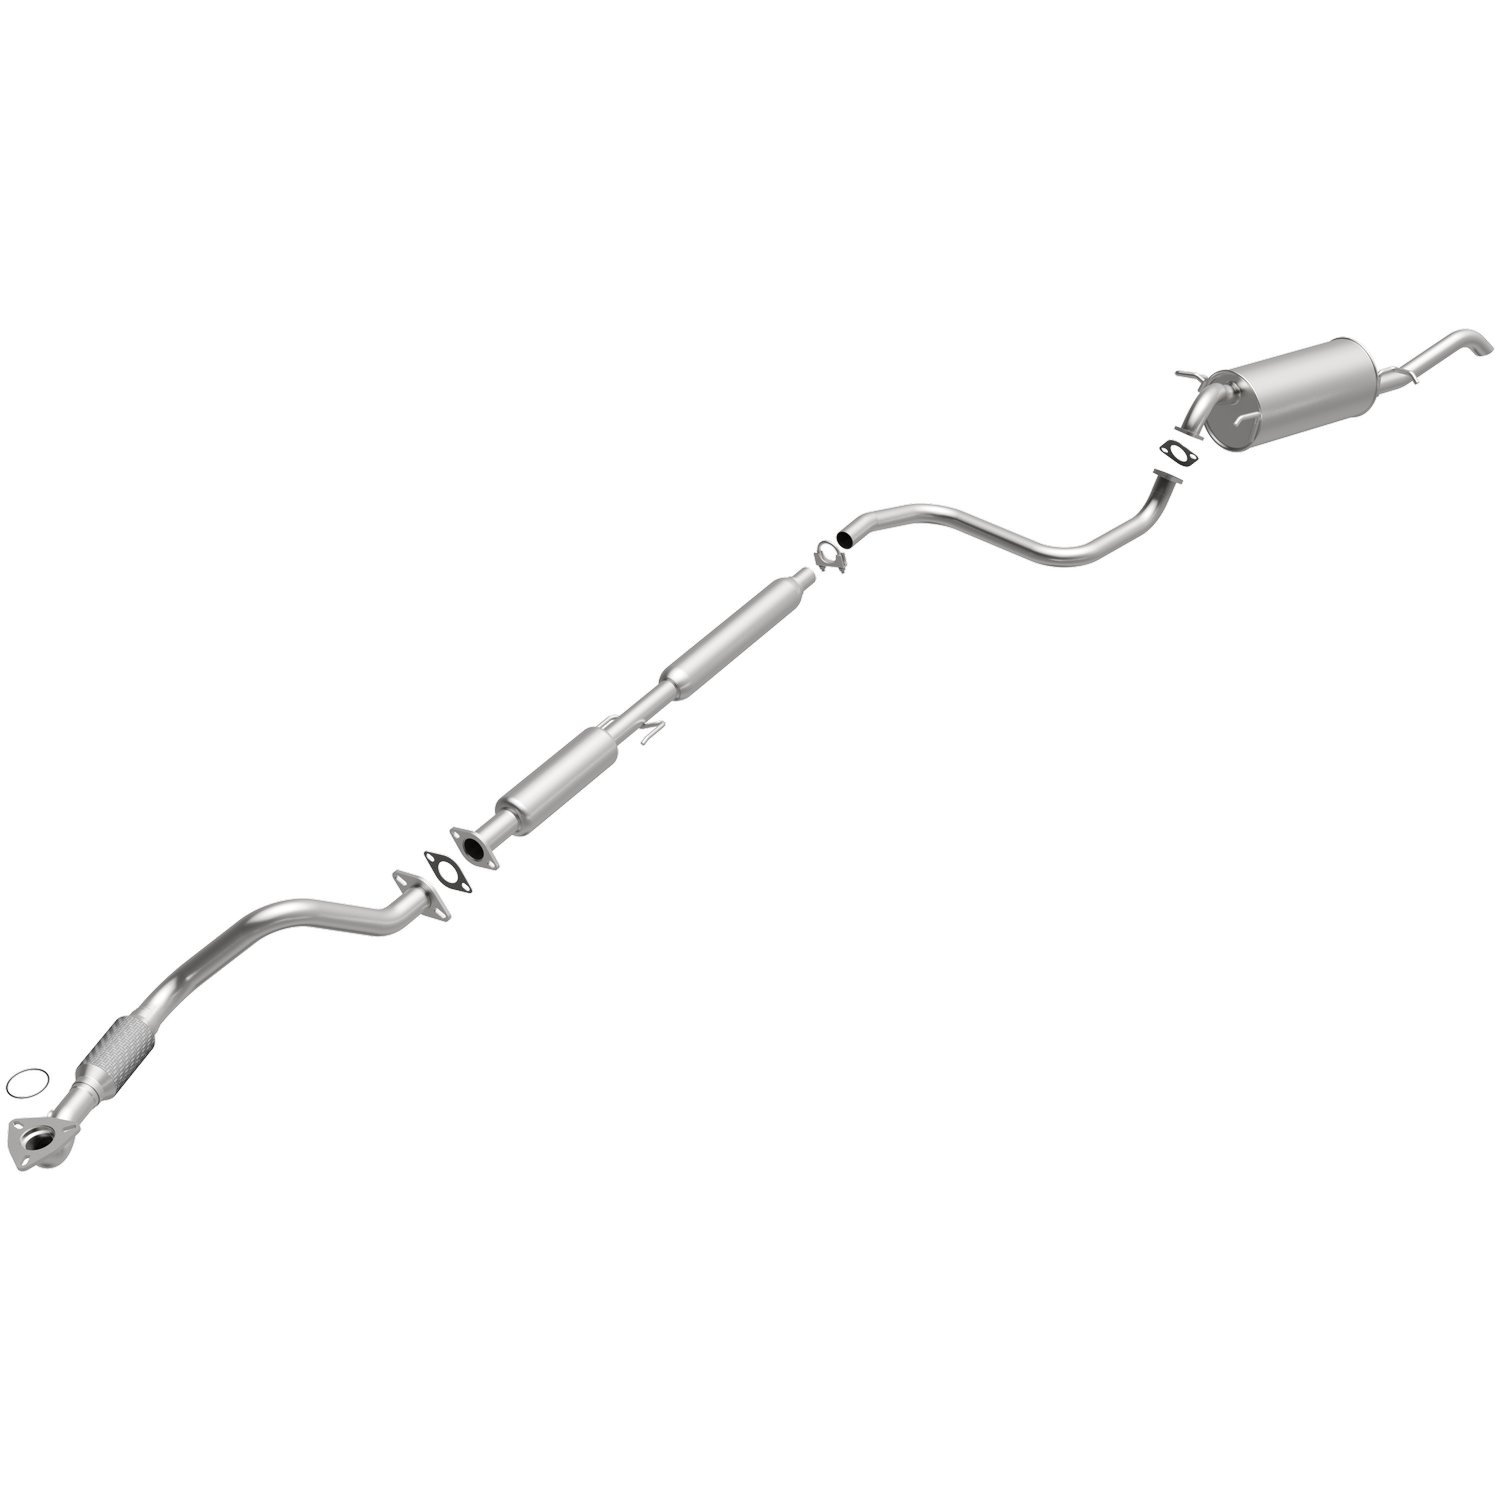 Direct-Fit Exhaust Kit, 2004-2006 Chevy Aveo 1.6L